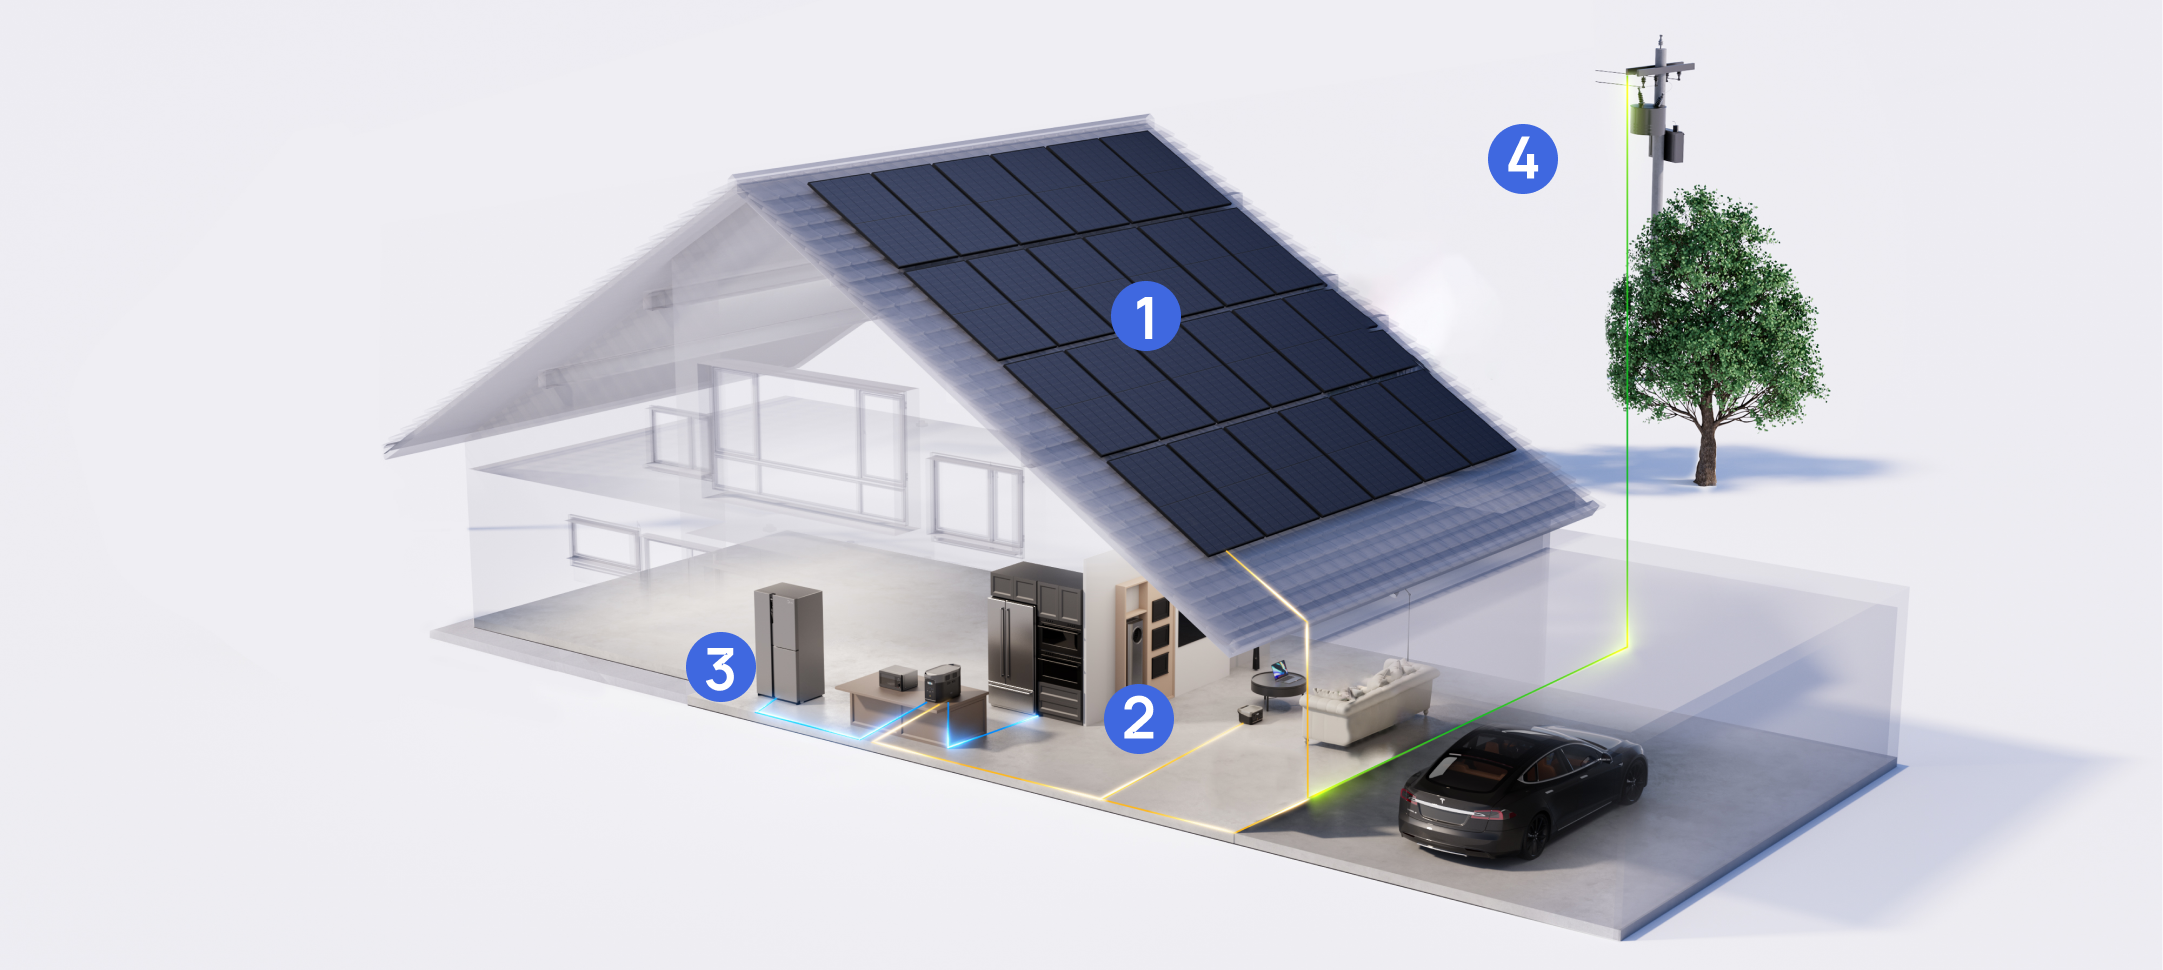 EcoFlow brings solar power to any home, even apartments and